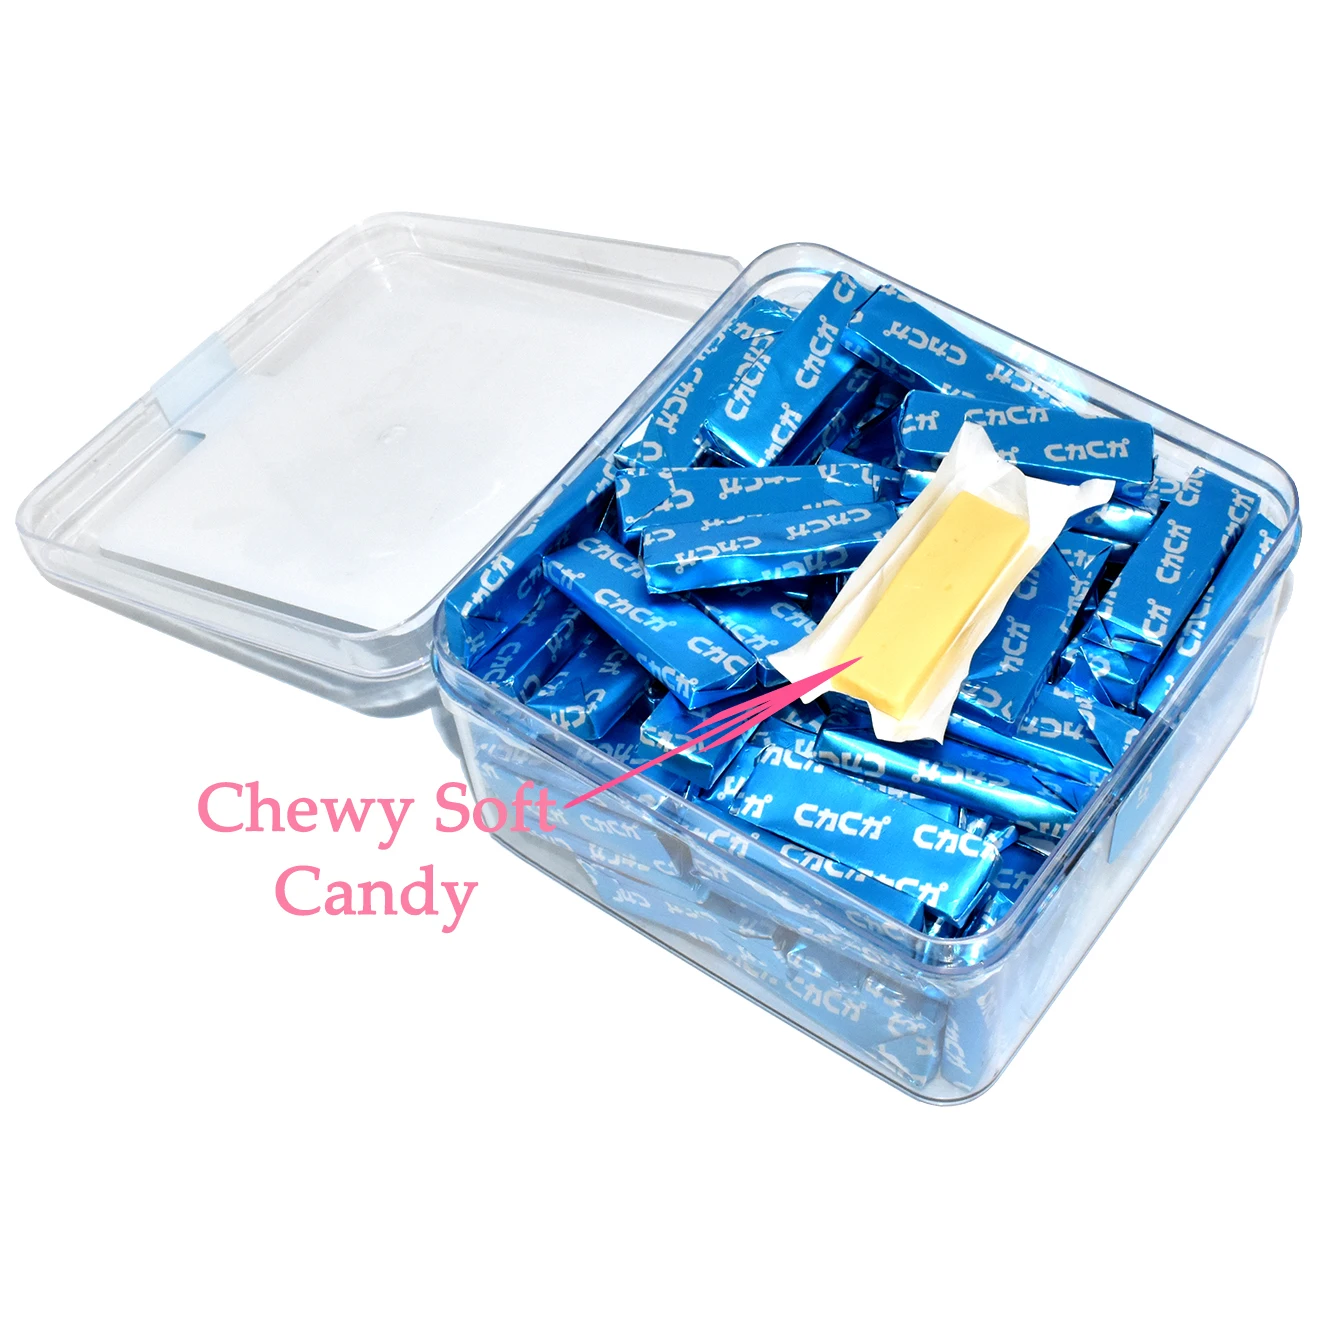 blueberry flavor chewy soft candy / chewy candy